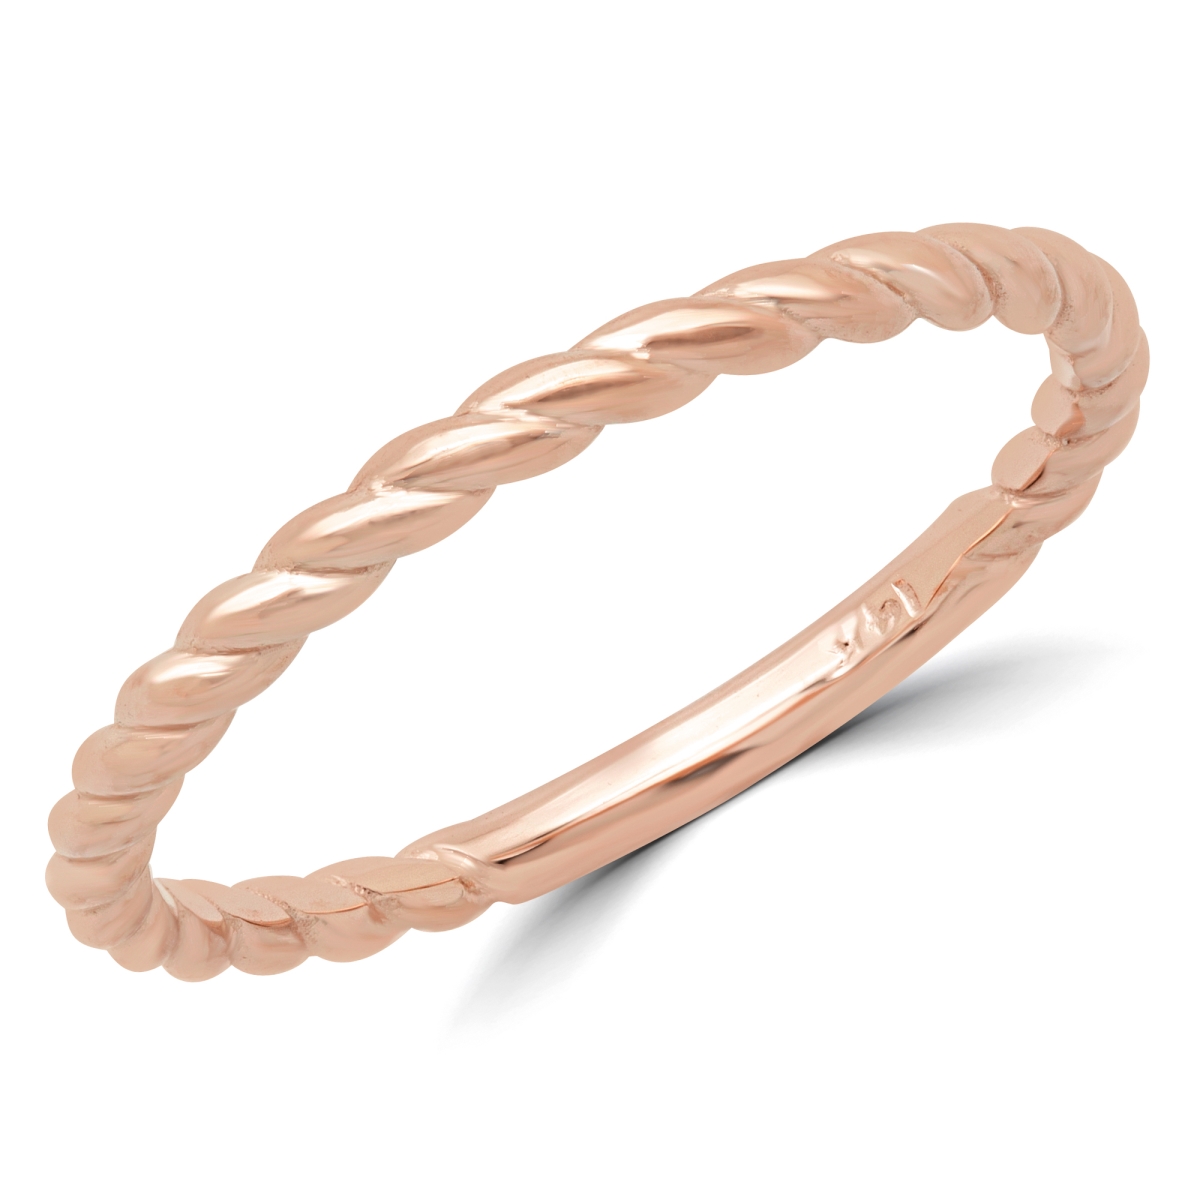 Picture of Majesty Diamonds MD180603-8 Braided Rope Classic Wedding Band Ring in 14K Rose Gold - Size 8